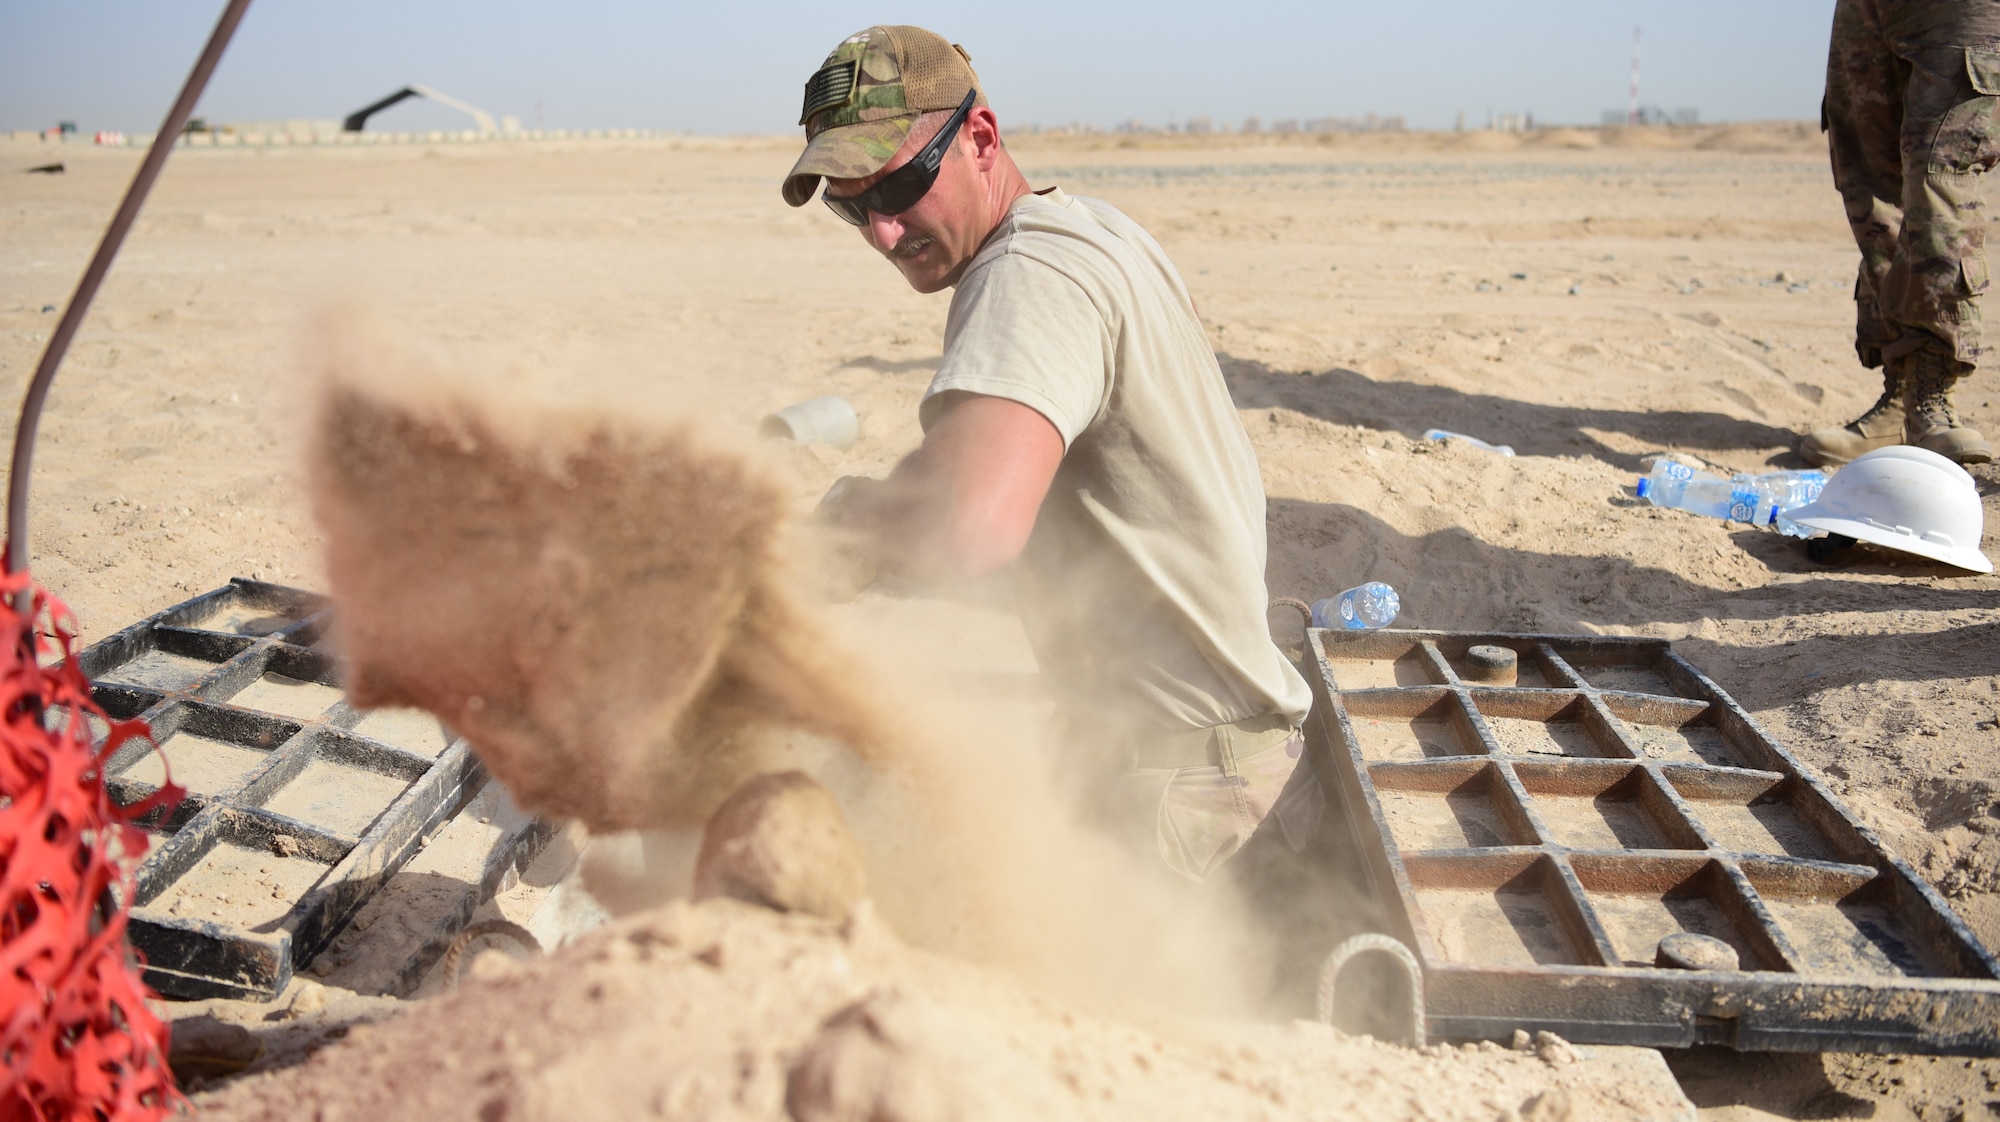 Senior Airman Austin Stimmel, 379th Expeditionary Civil Engineer Squadron cable and antenna systems technician, shovels dirt from a cable storage area at Cargo City, located at Abdullah Al Mubarak Air Base, Kuwait, June 25, 2018. Stimmel and his fellow Airmen are installing communications lines for the new operating location, slated to open later this year. (U.S. Air Force photo by Staff Sgt. Christopher Stoltz)